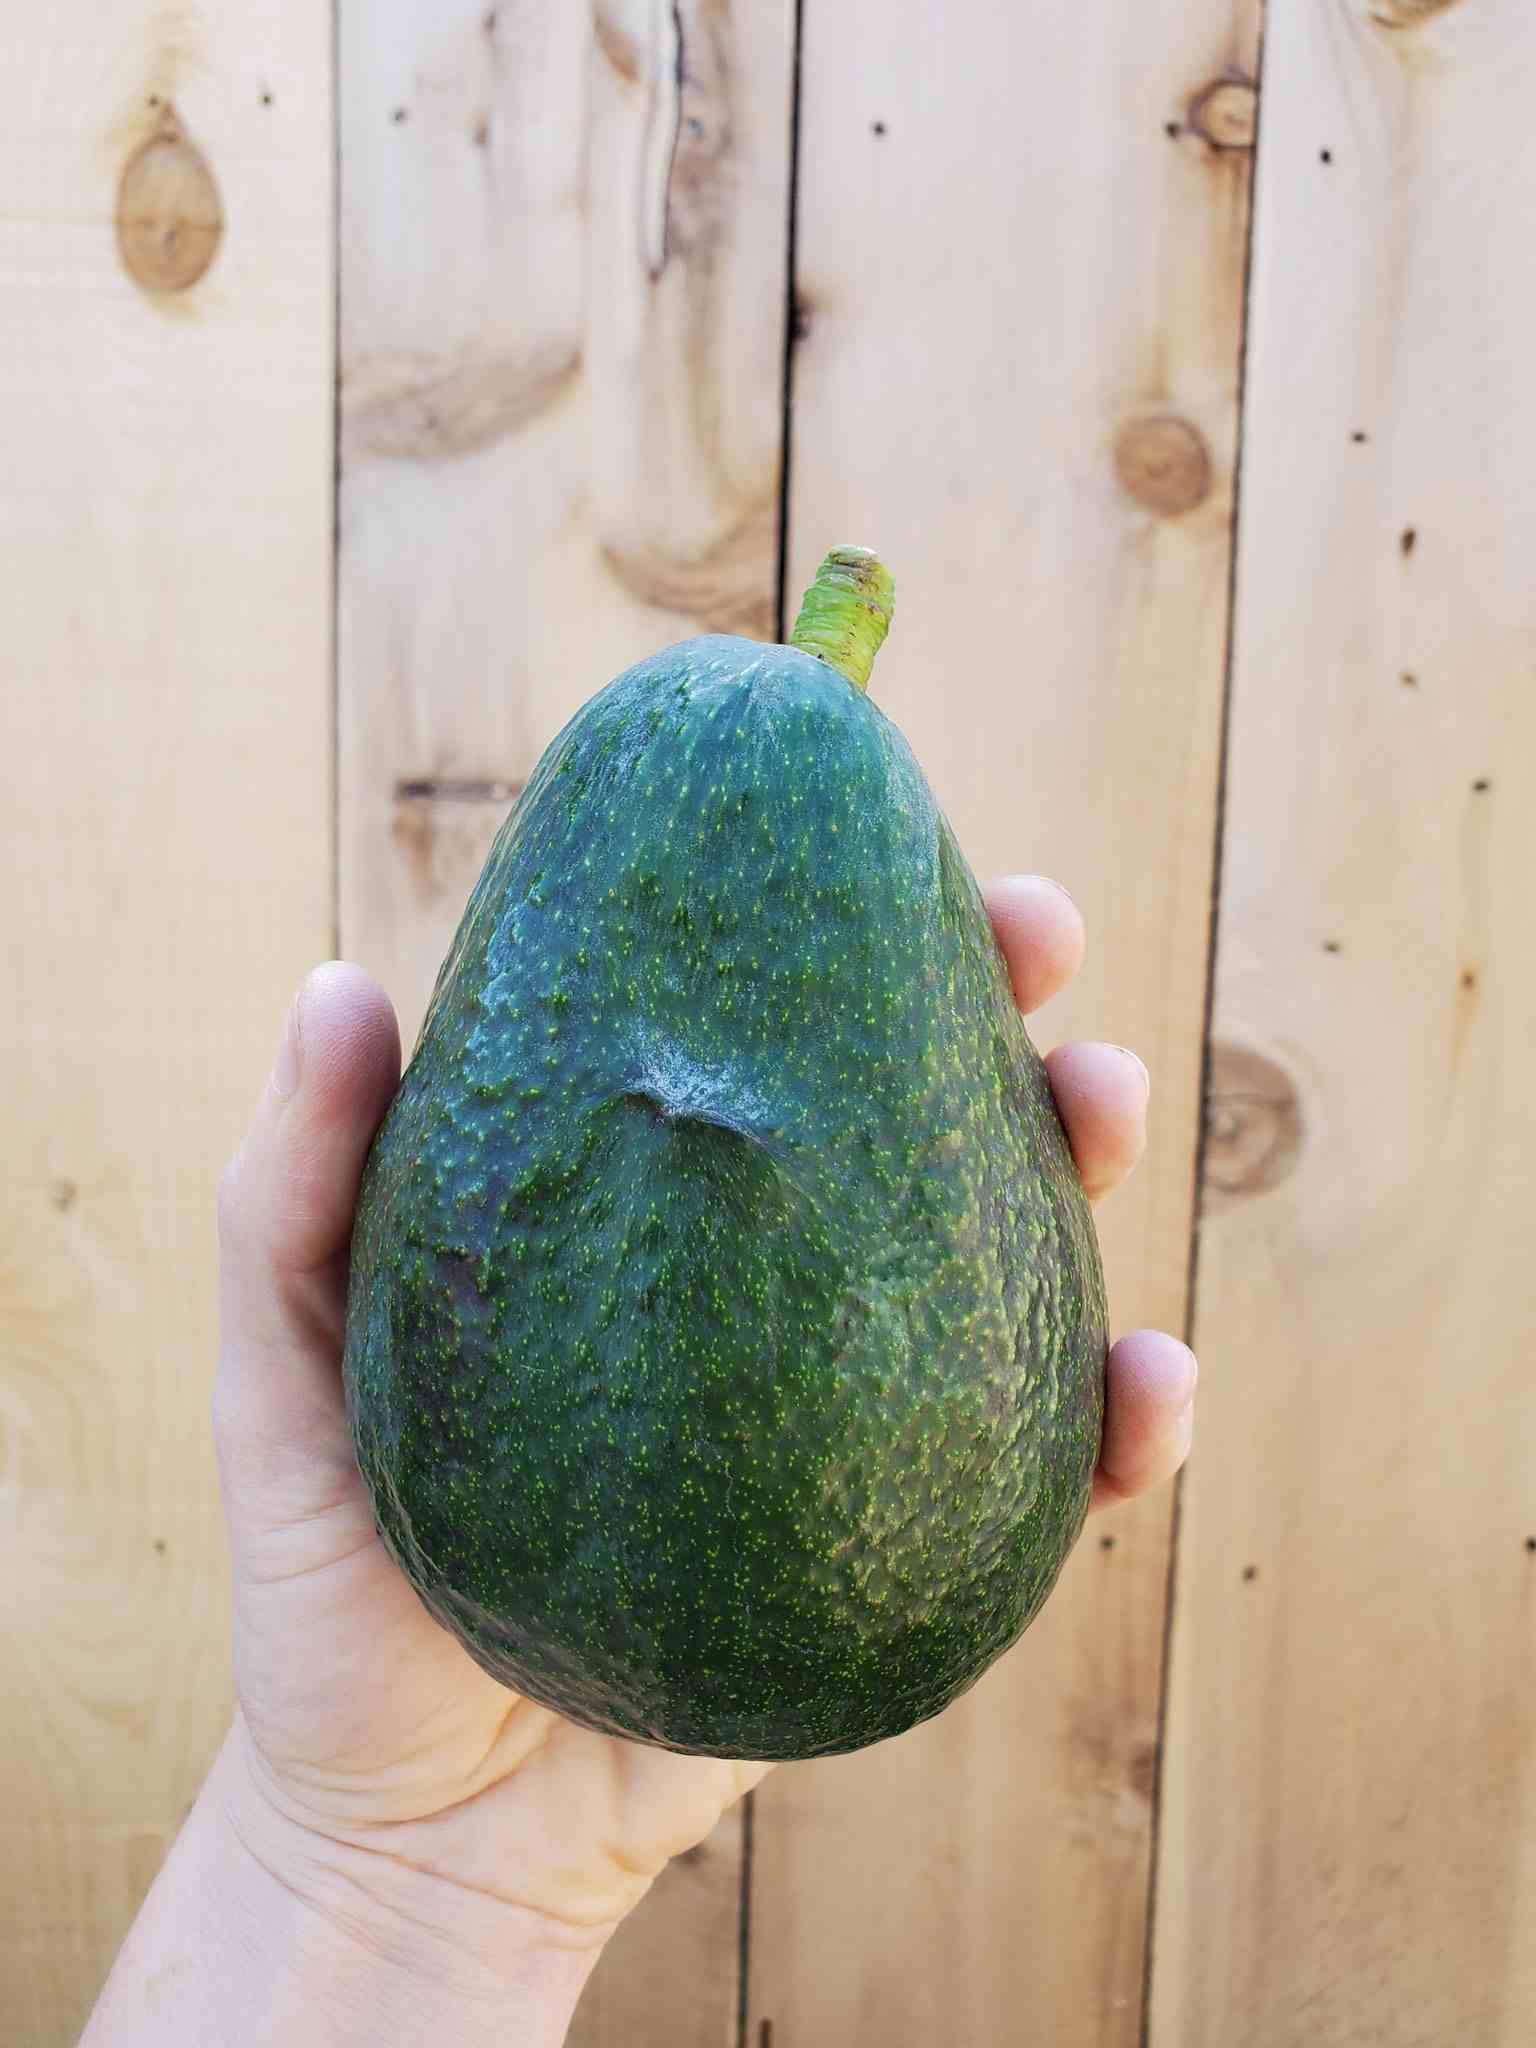 A hand is holding a large Sir Prize avocado against a fence line backdrop. The fruit is dark green and slightly pebbly. 